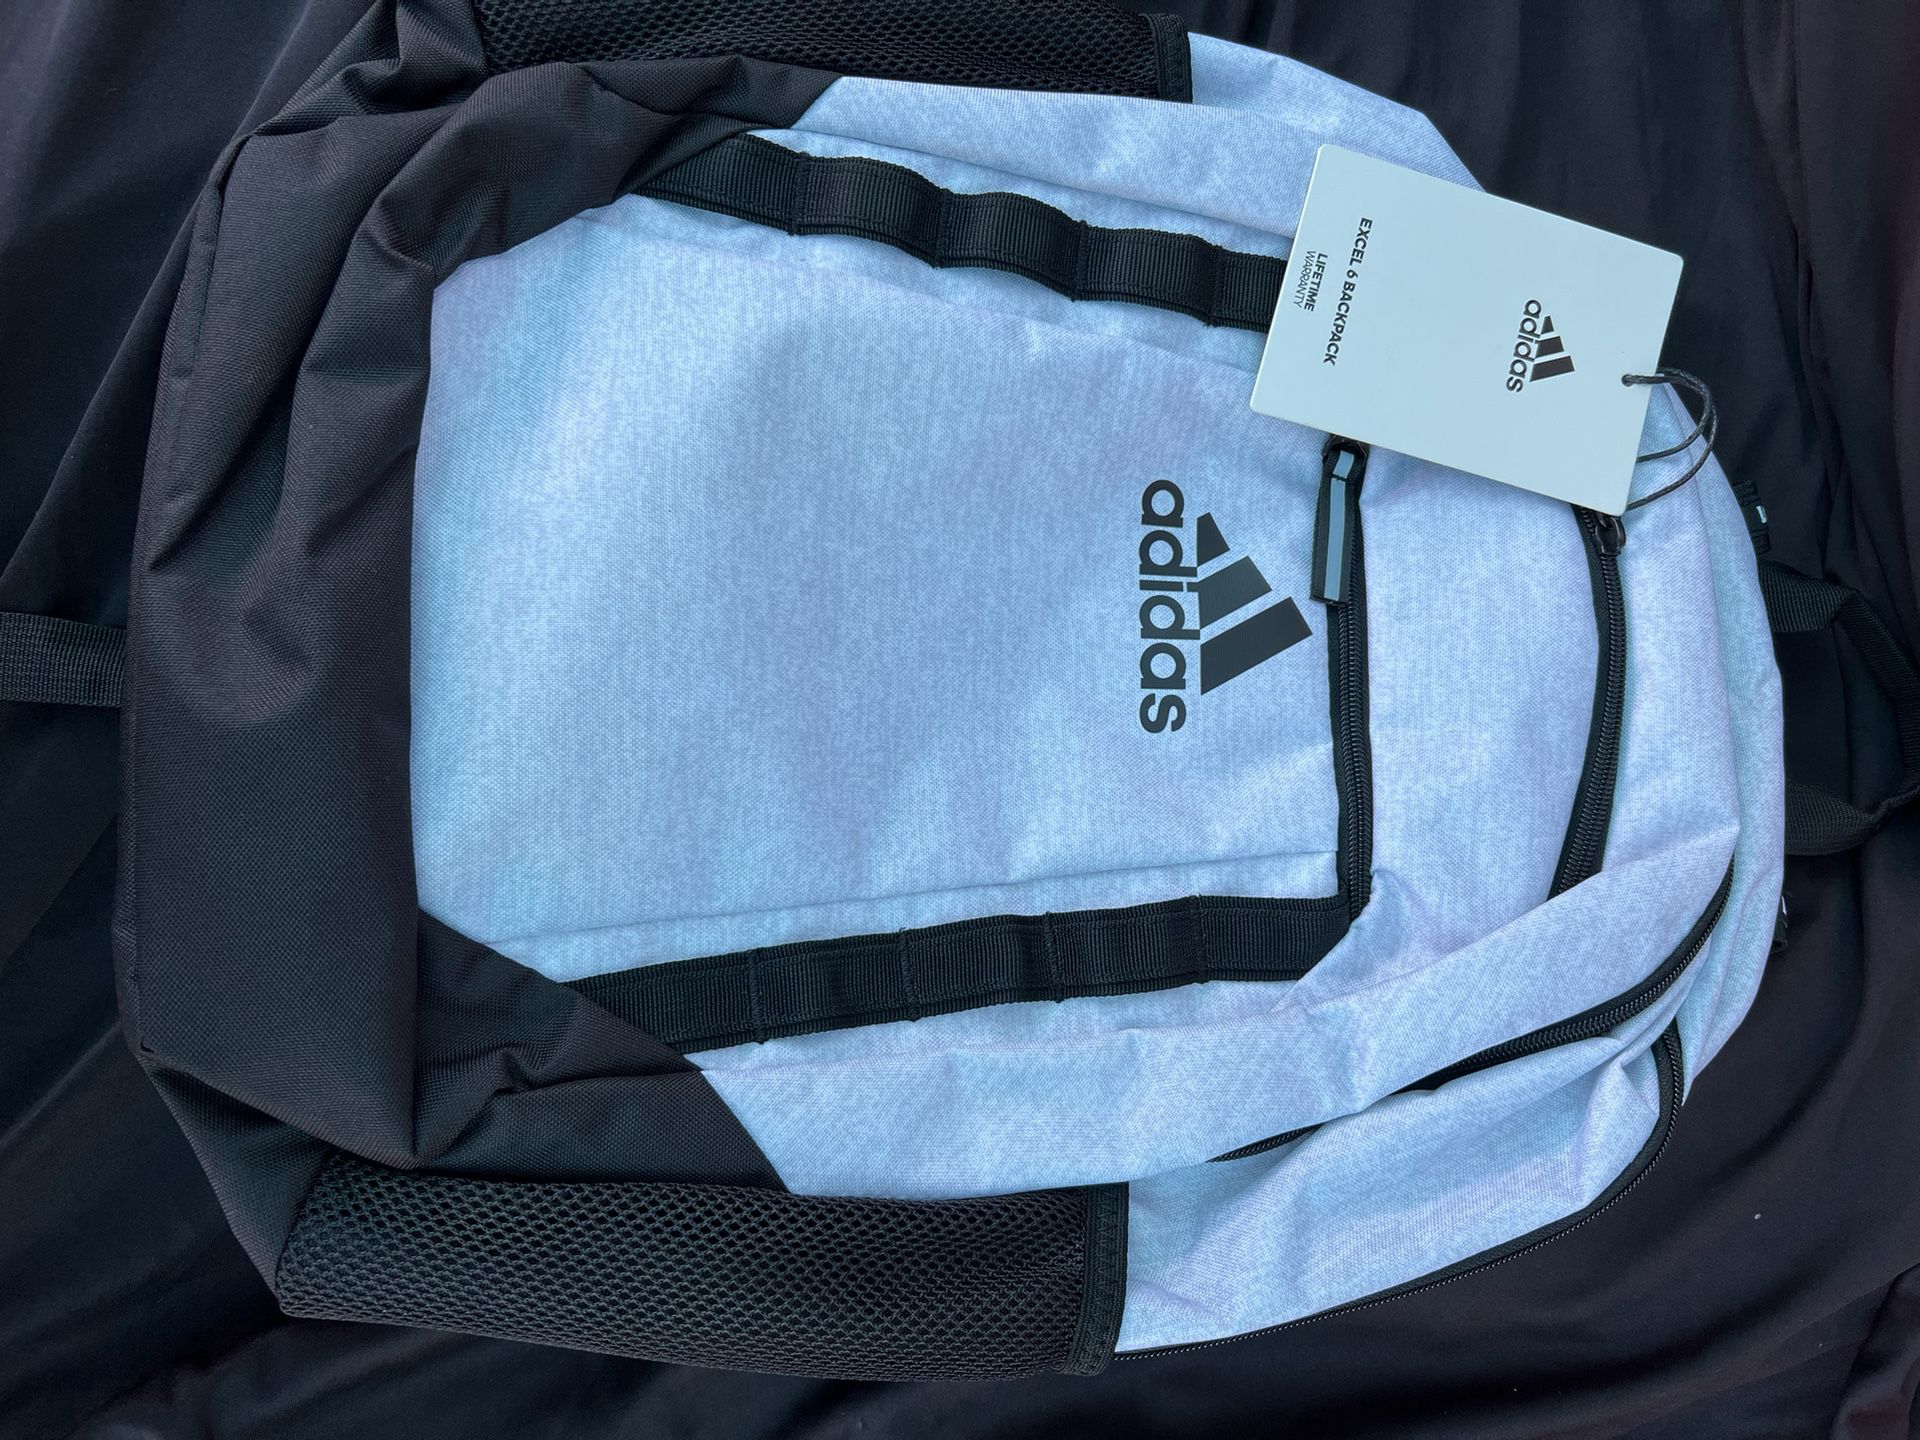 Adidas Backpack for Fontana, CA - OfferUp